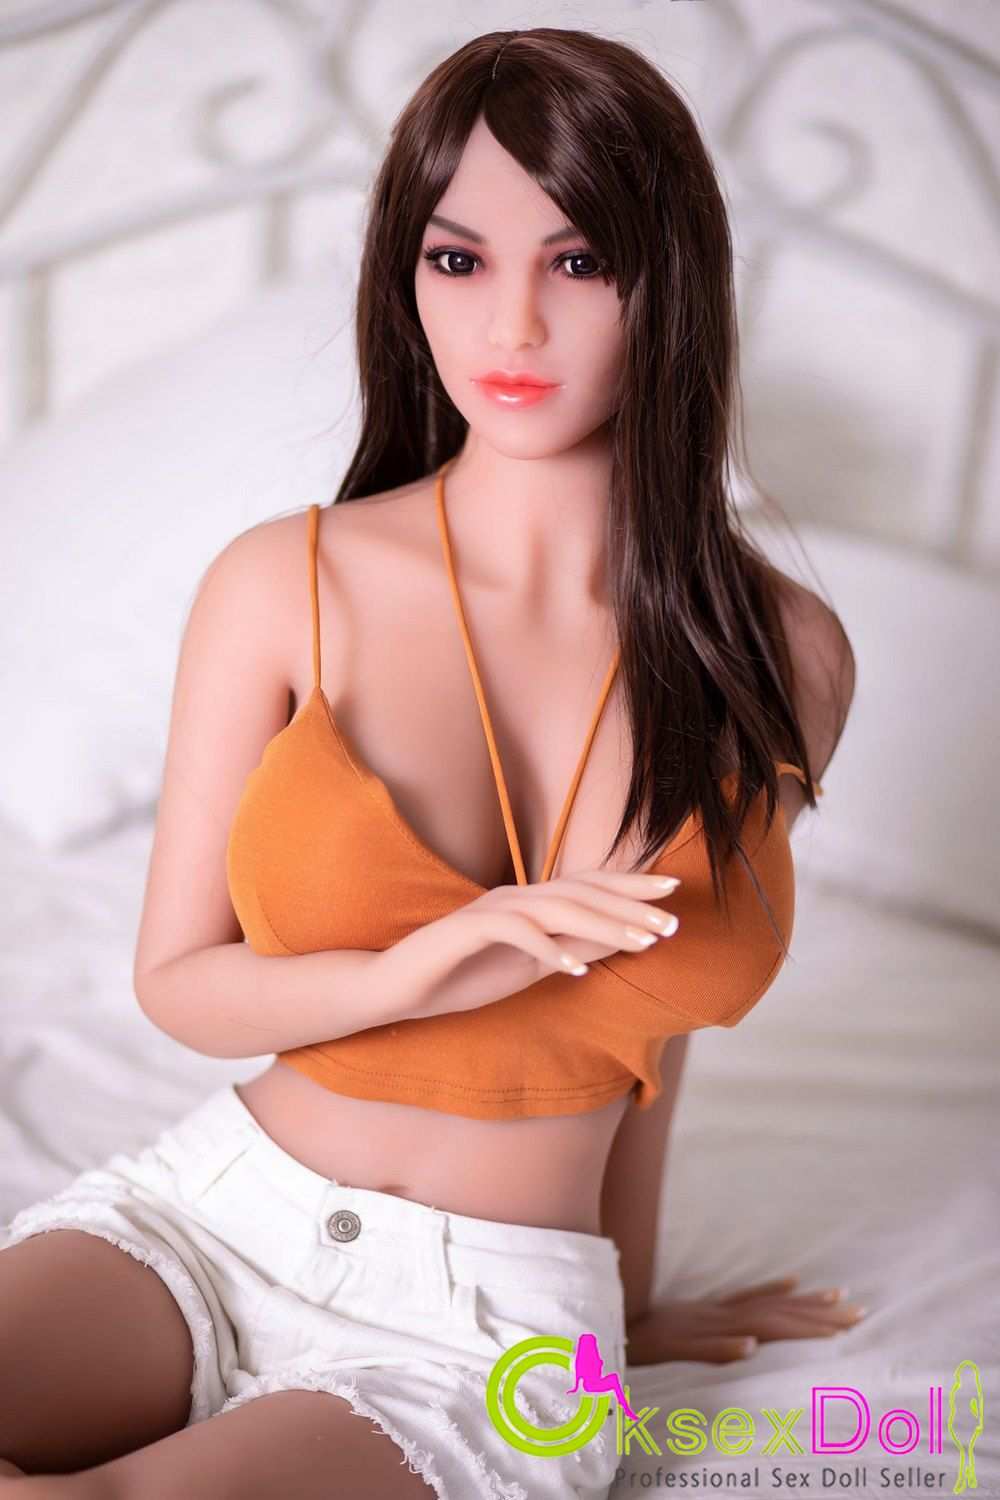 Cheap Lady Sex Doll Photos of Ivory